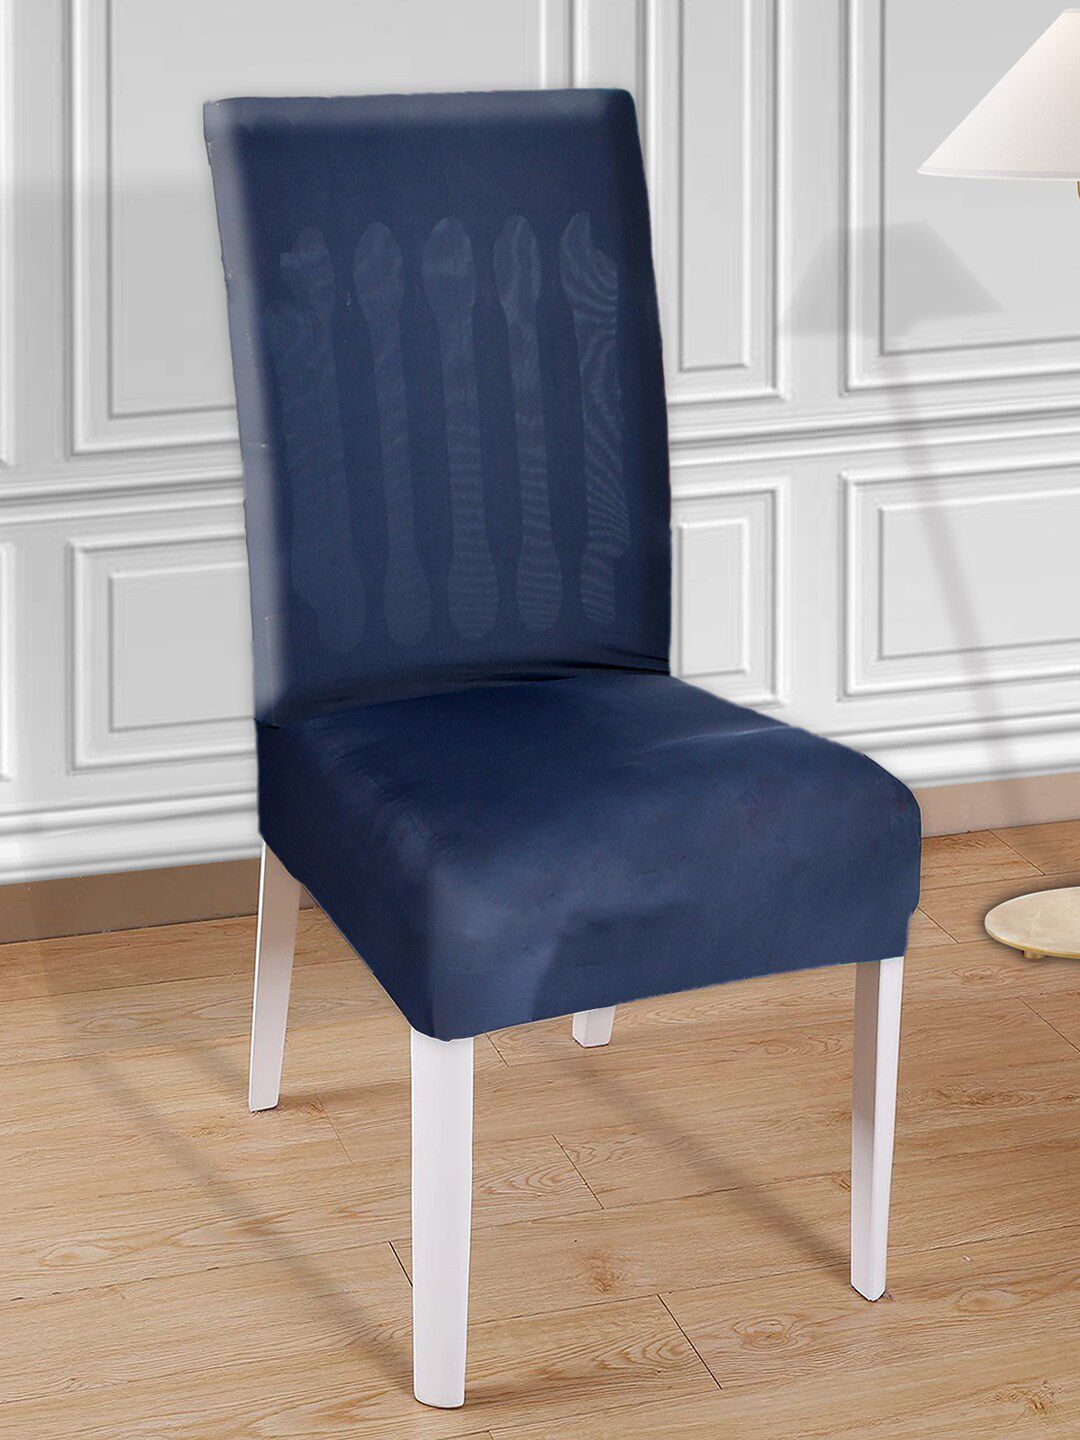 Kuber Industries Blue Solid Chair Cover Price in India